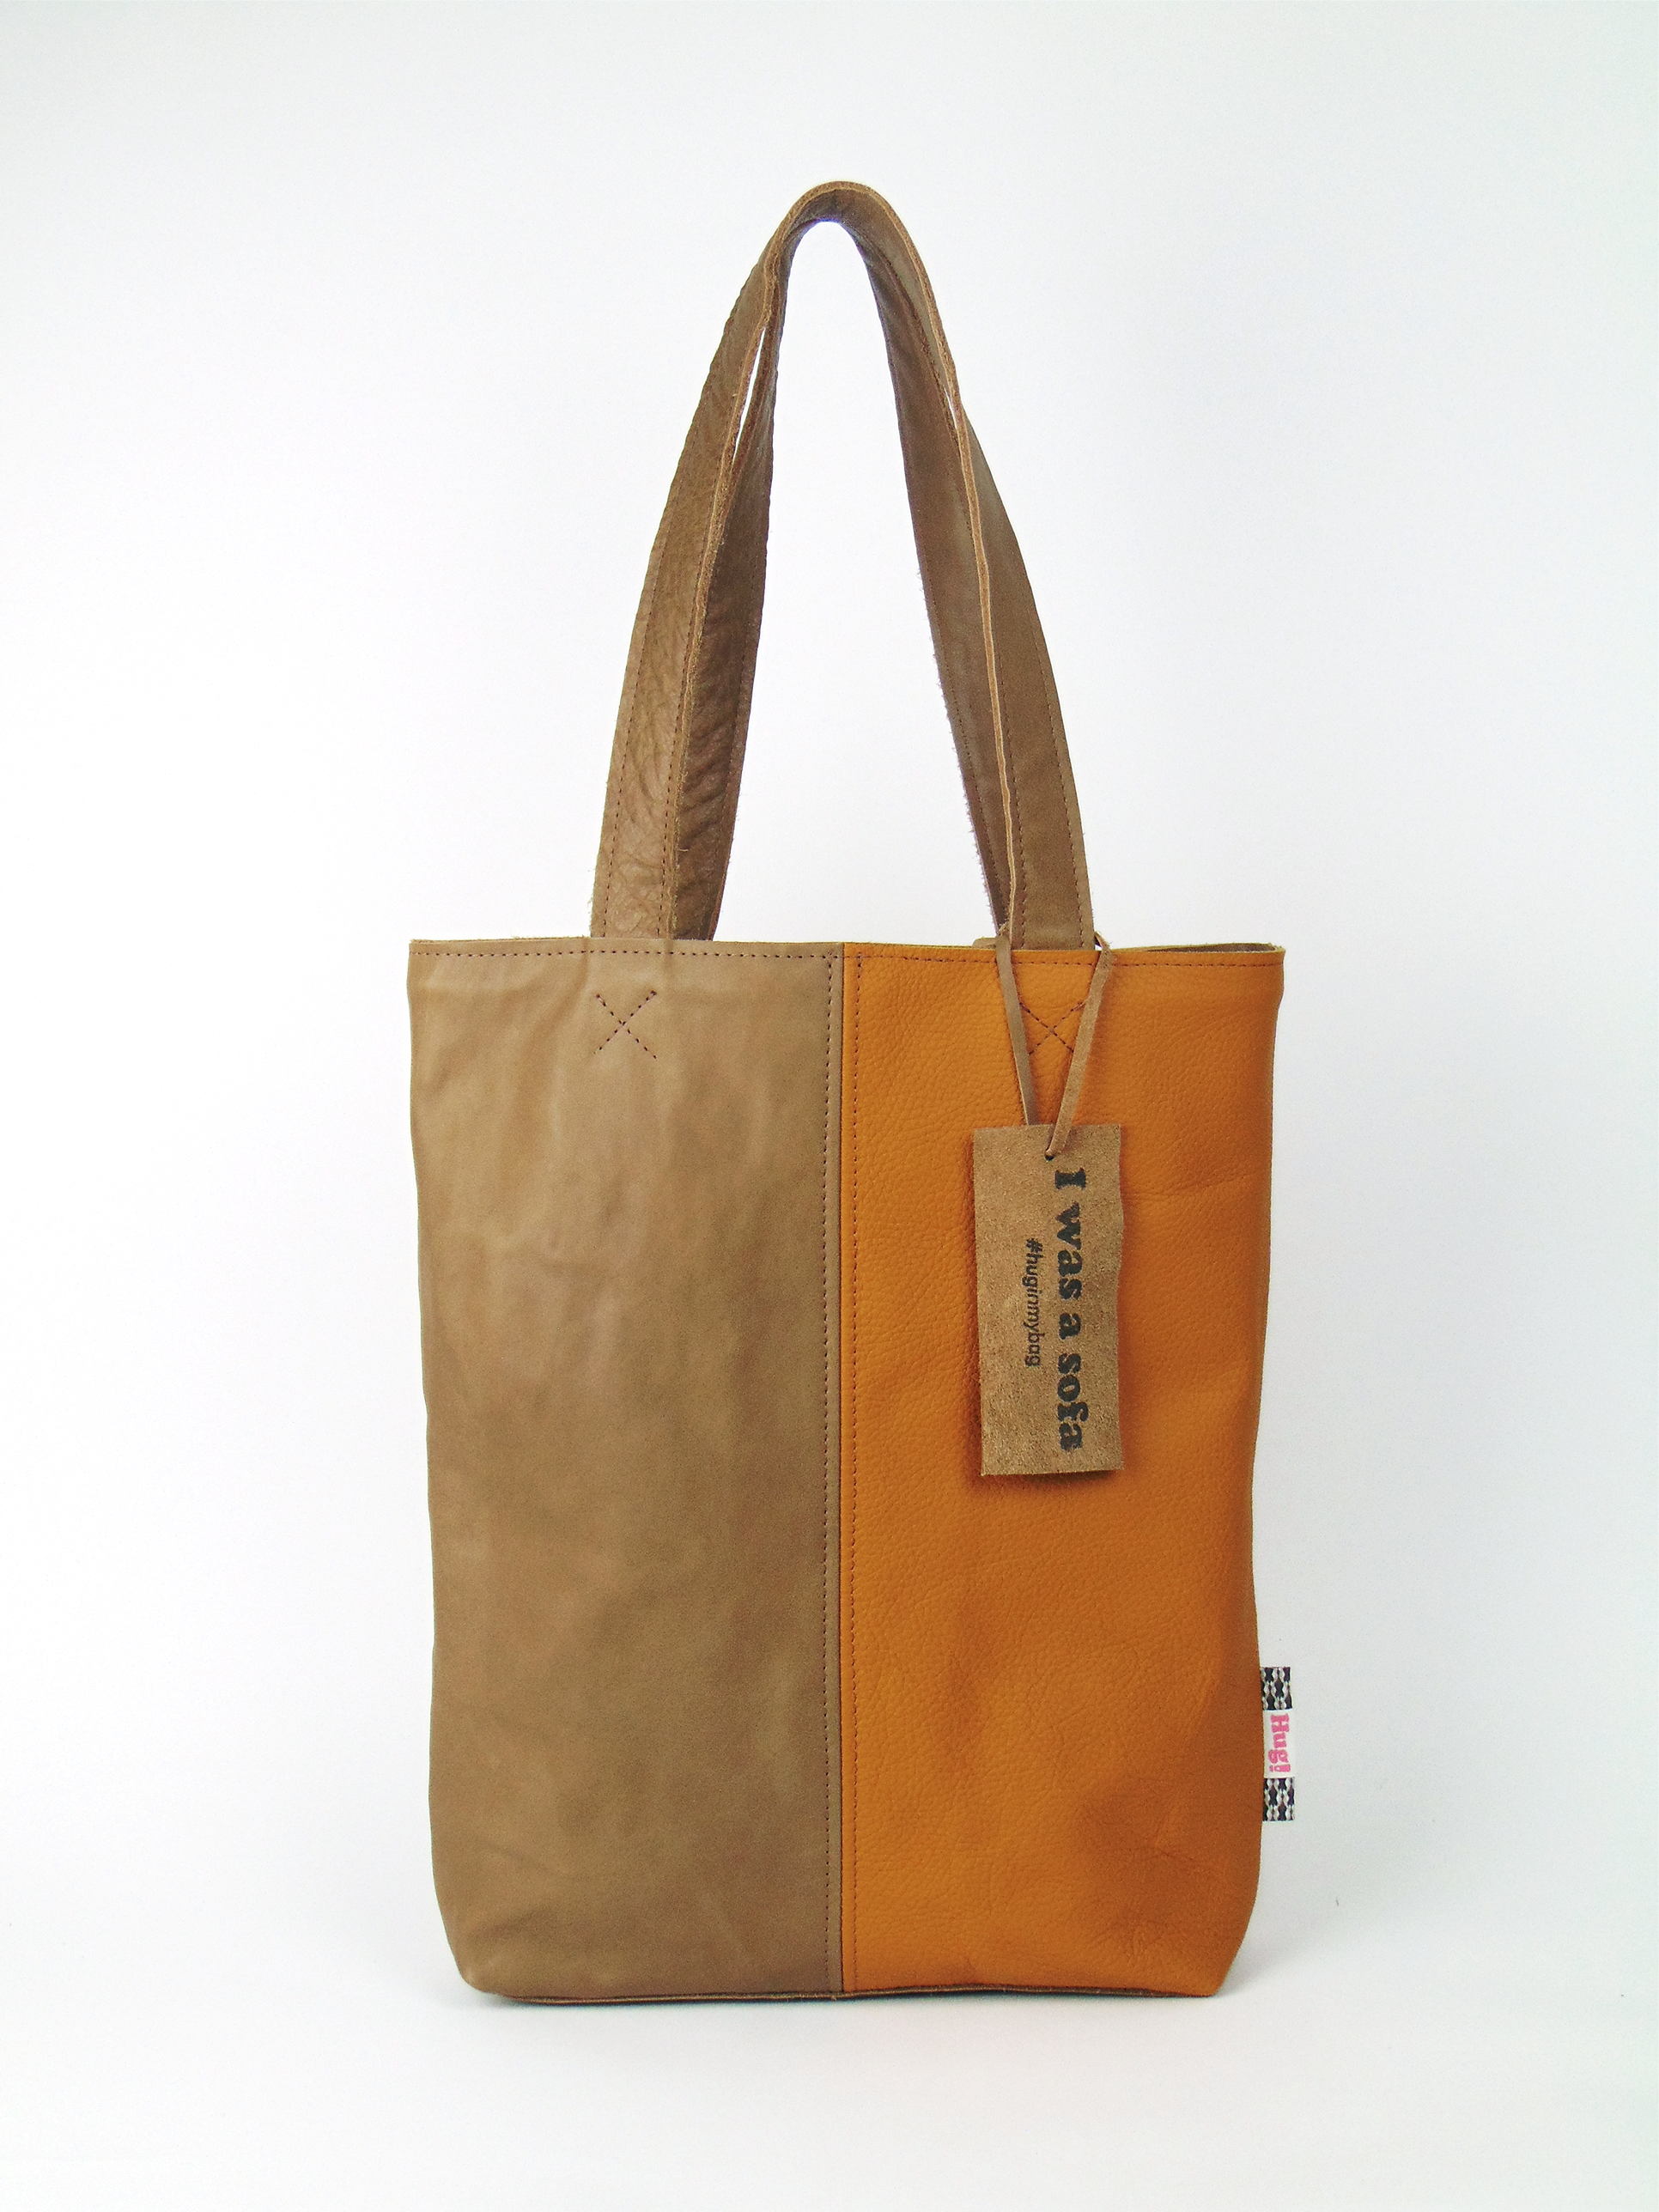 Product image of the shopper named Sunny Safari. This shopper is made from recycled leather in a colour combination of beige and yellow.